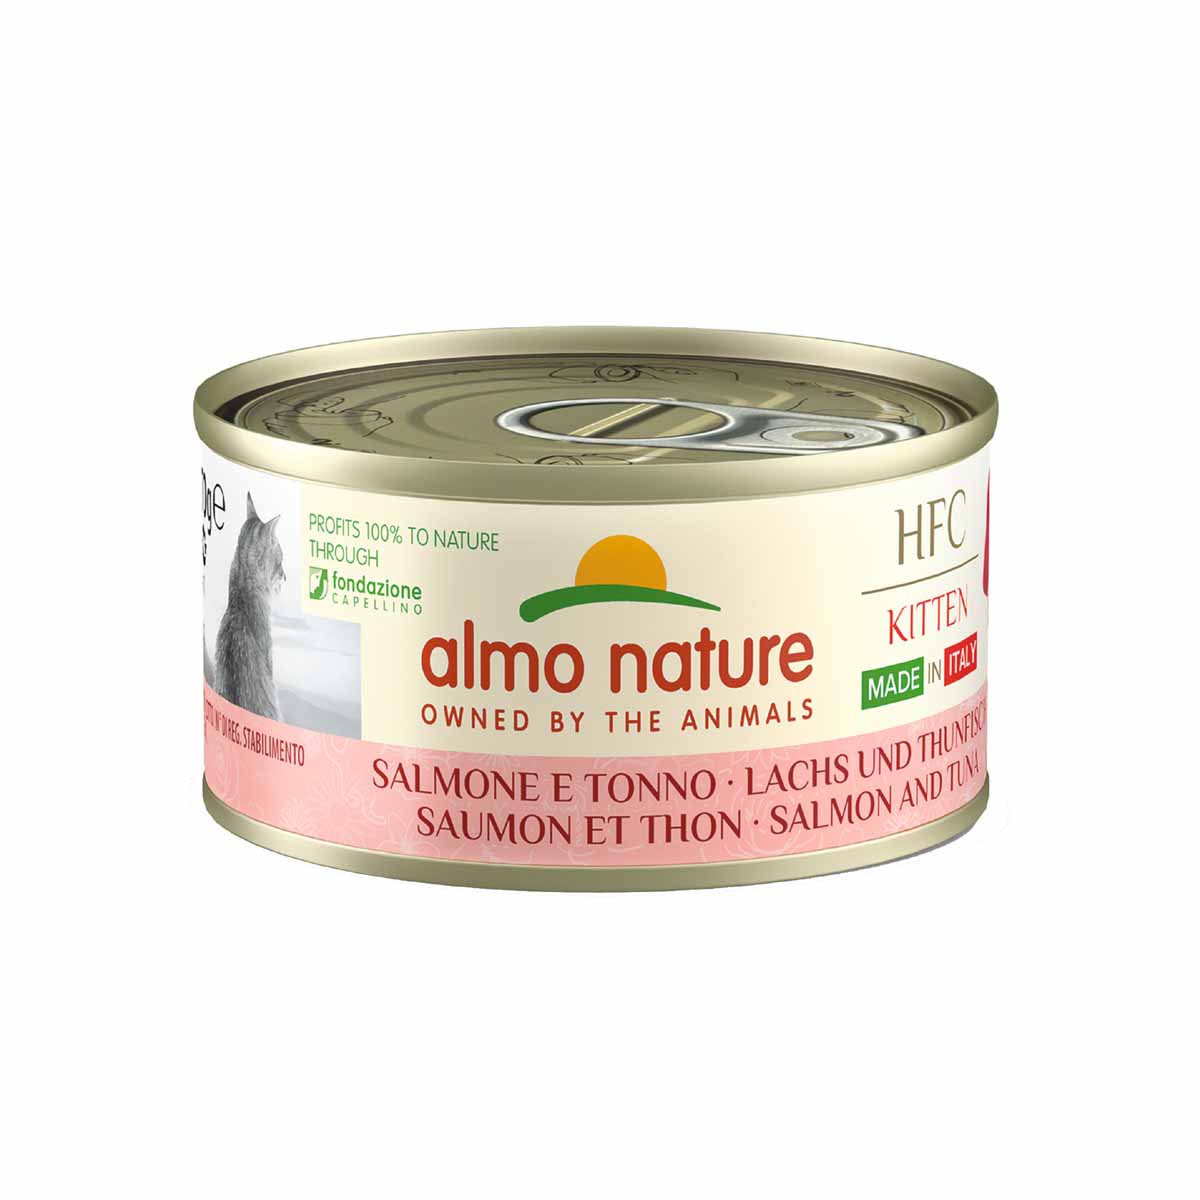 Almo Nature HFC Cat ‘Made in Italy’ 70g